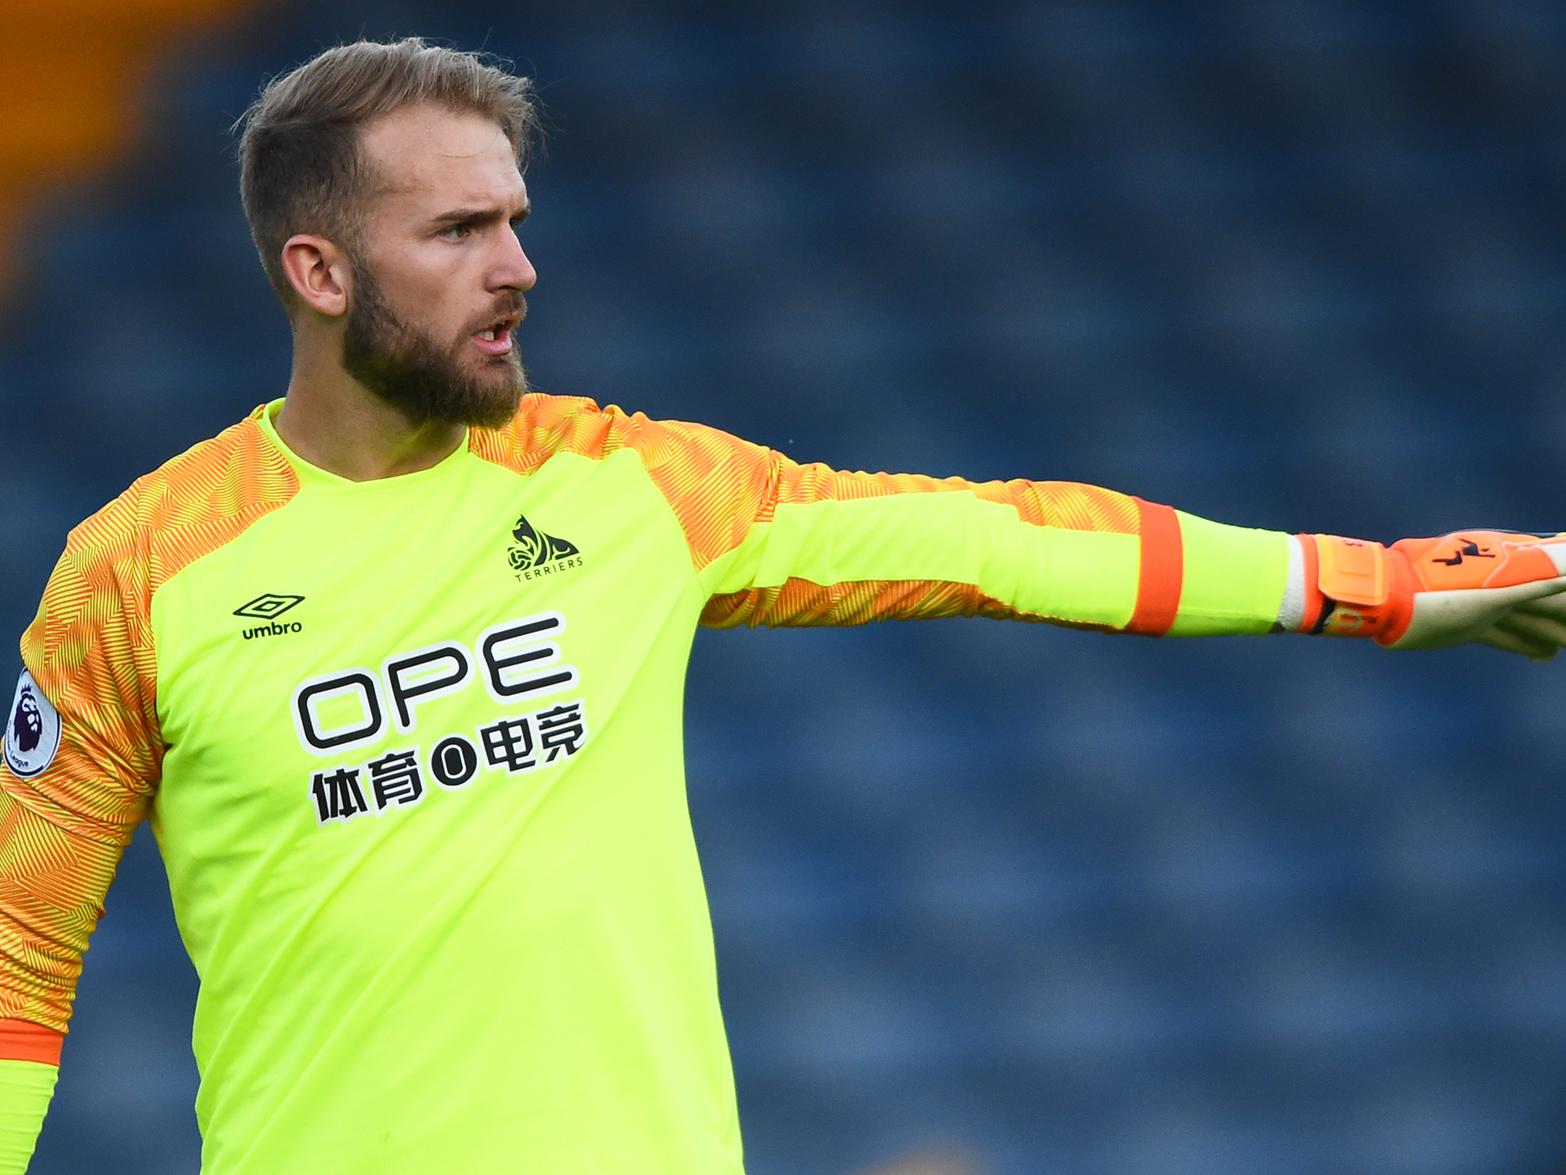 Huddersfield Town manager Danny Cowley has revealed he may look to loan out either Joel Coleman or Ryan Schofield in January, as he looks to secure his backup 'keepers first team football. (Hull Examiner)